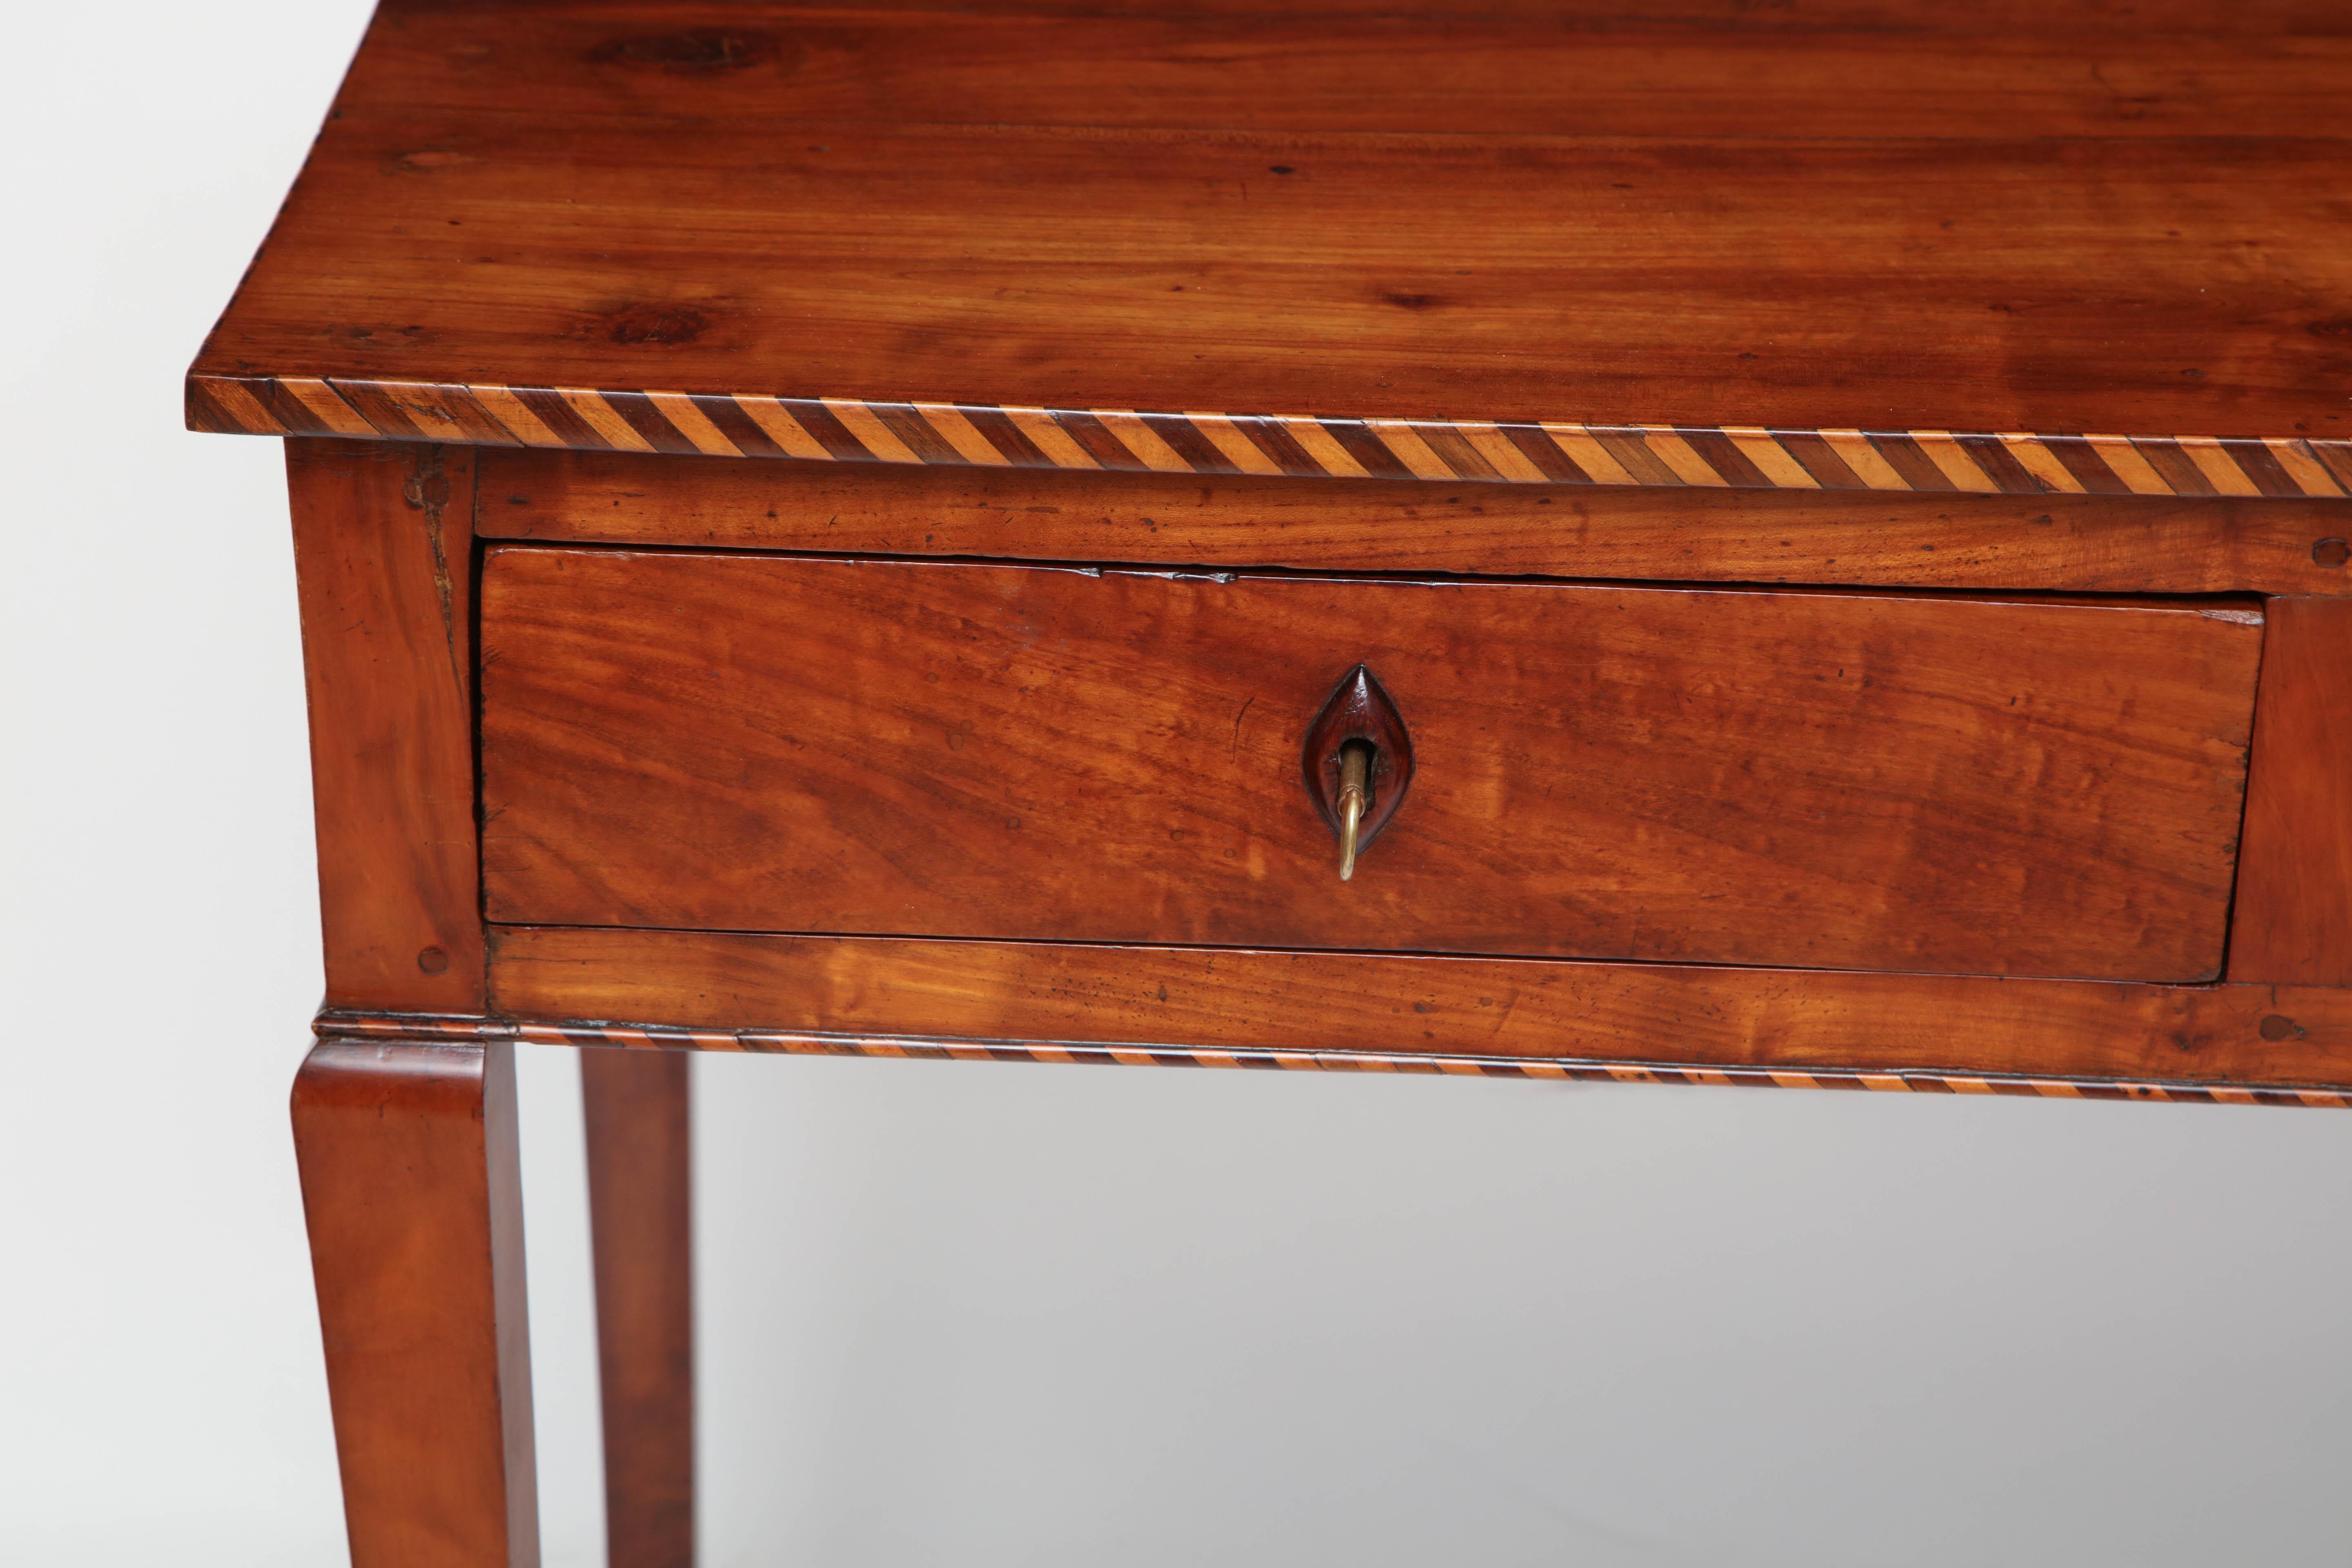 18th Century Italian Cherry Table with Parquetry Border and Two Drawers 1